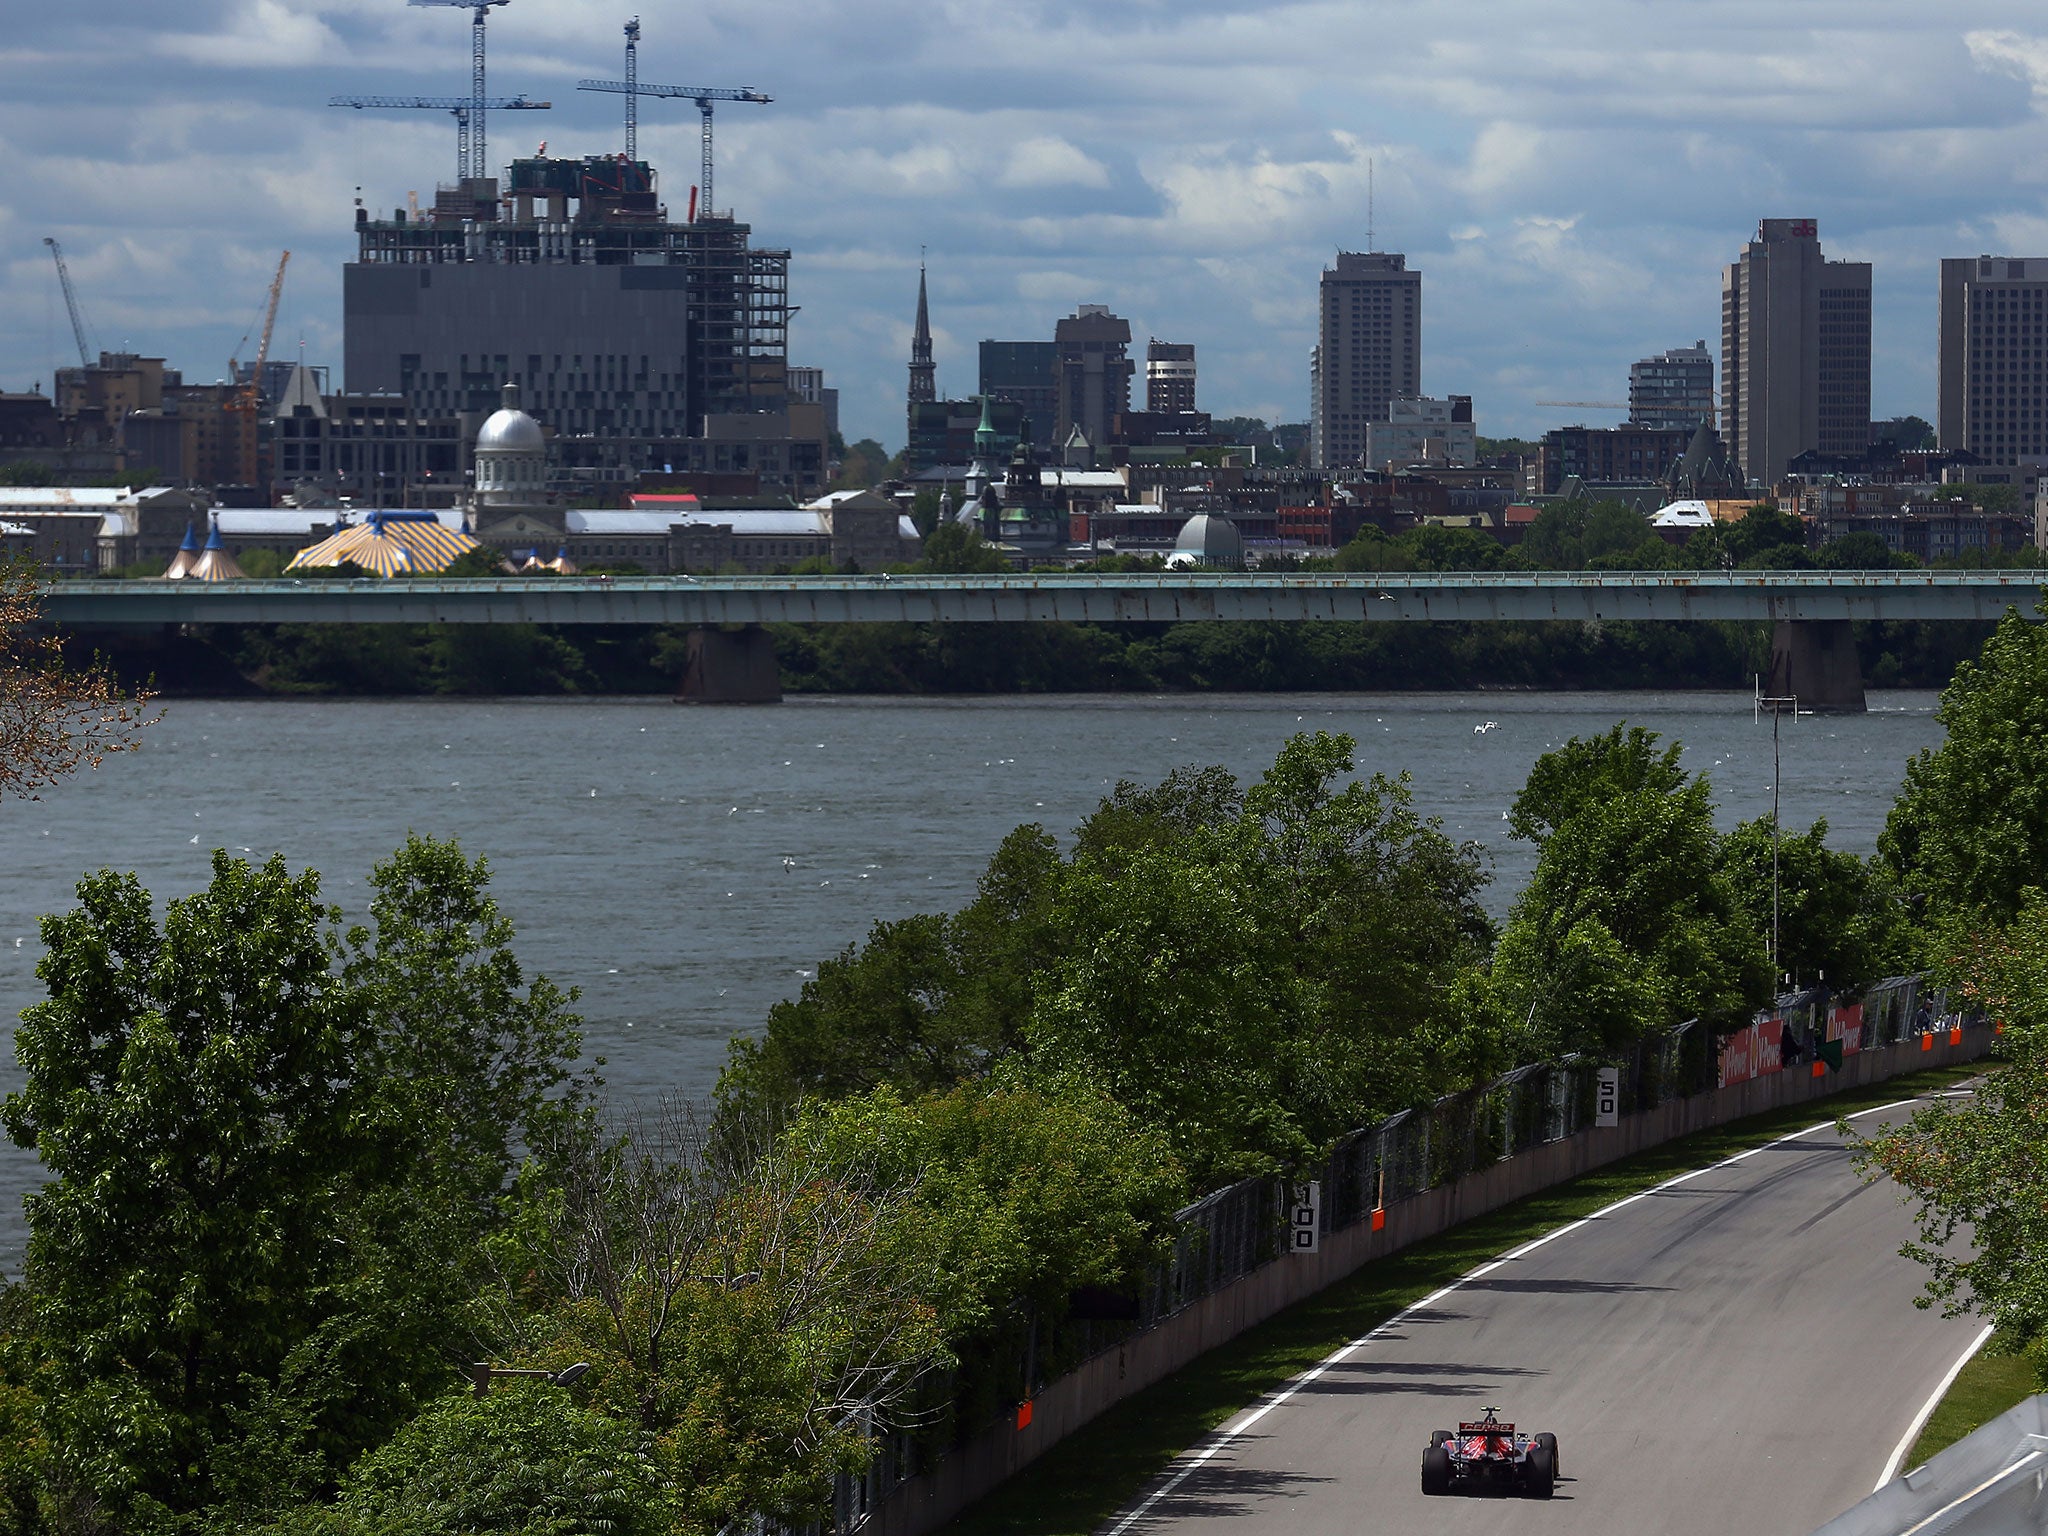 Montreal will host the Canadian Grand Prix for the next 10 years after an agreement was reached